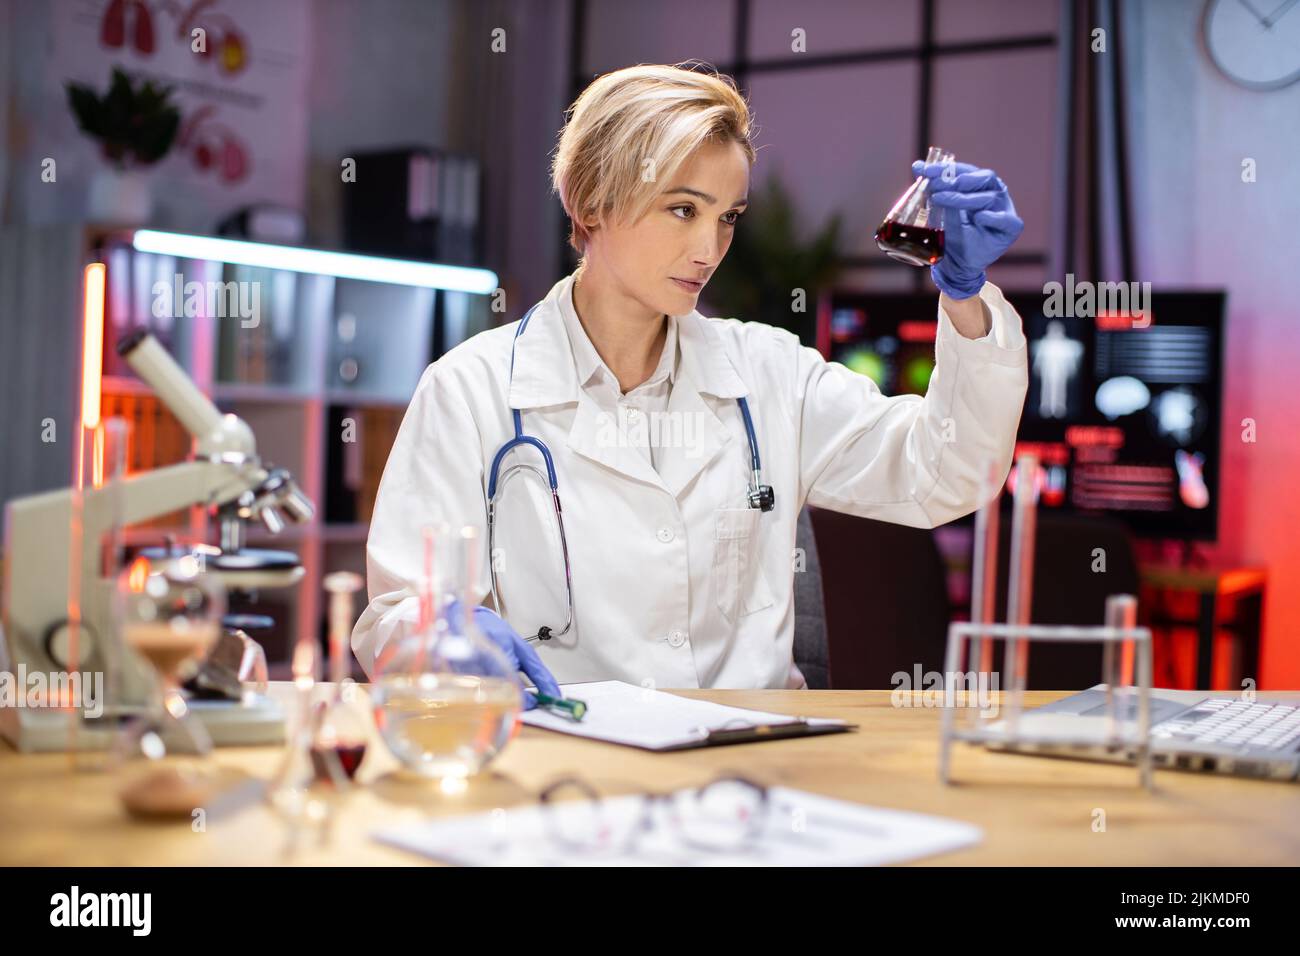 Female scientist working in modern lab. Doctor making microbiology research. Laboratory tools: microscope, test tubes, equipment. Coronavirus covid-19, bacteriology, virology, dna and health care. Stock Photo